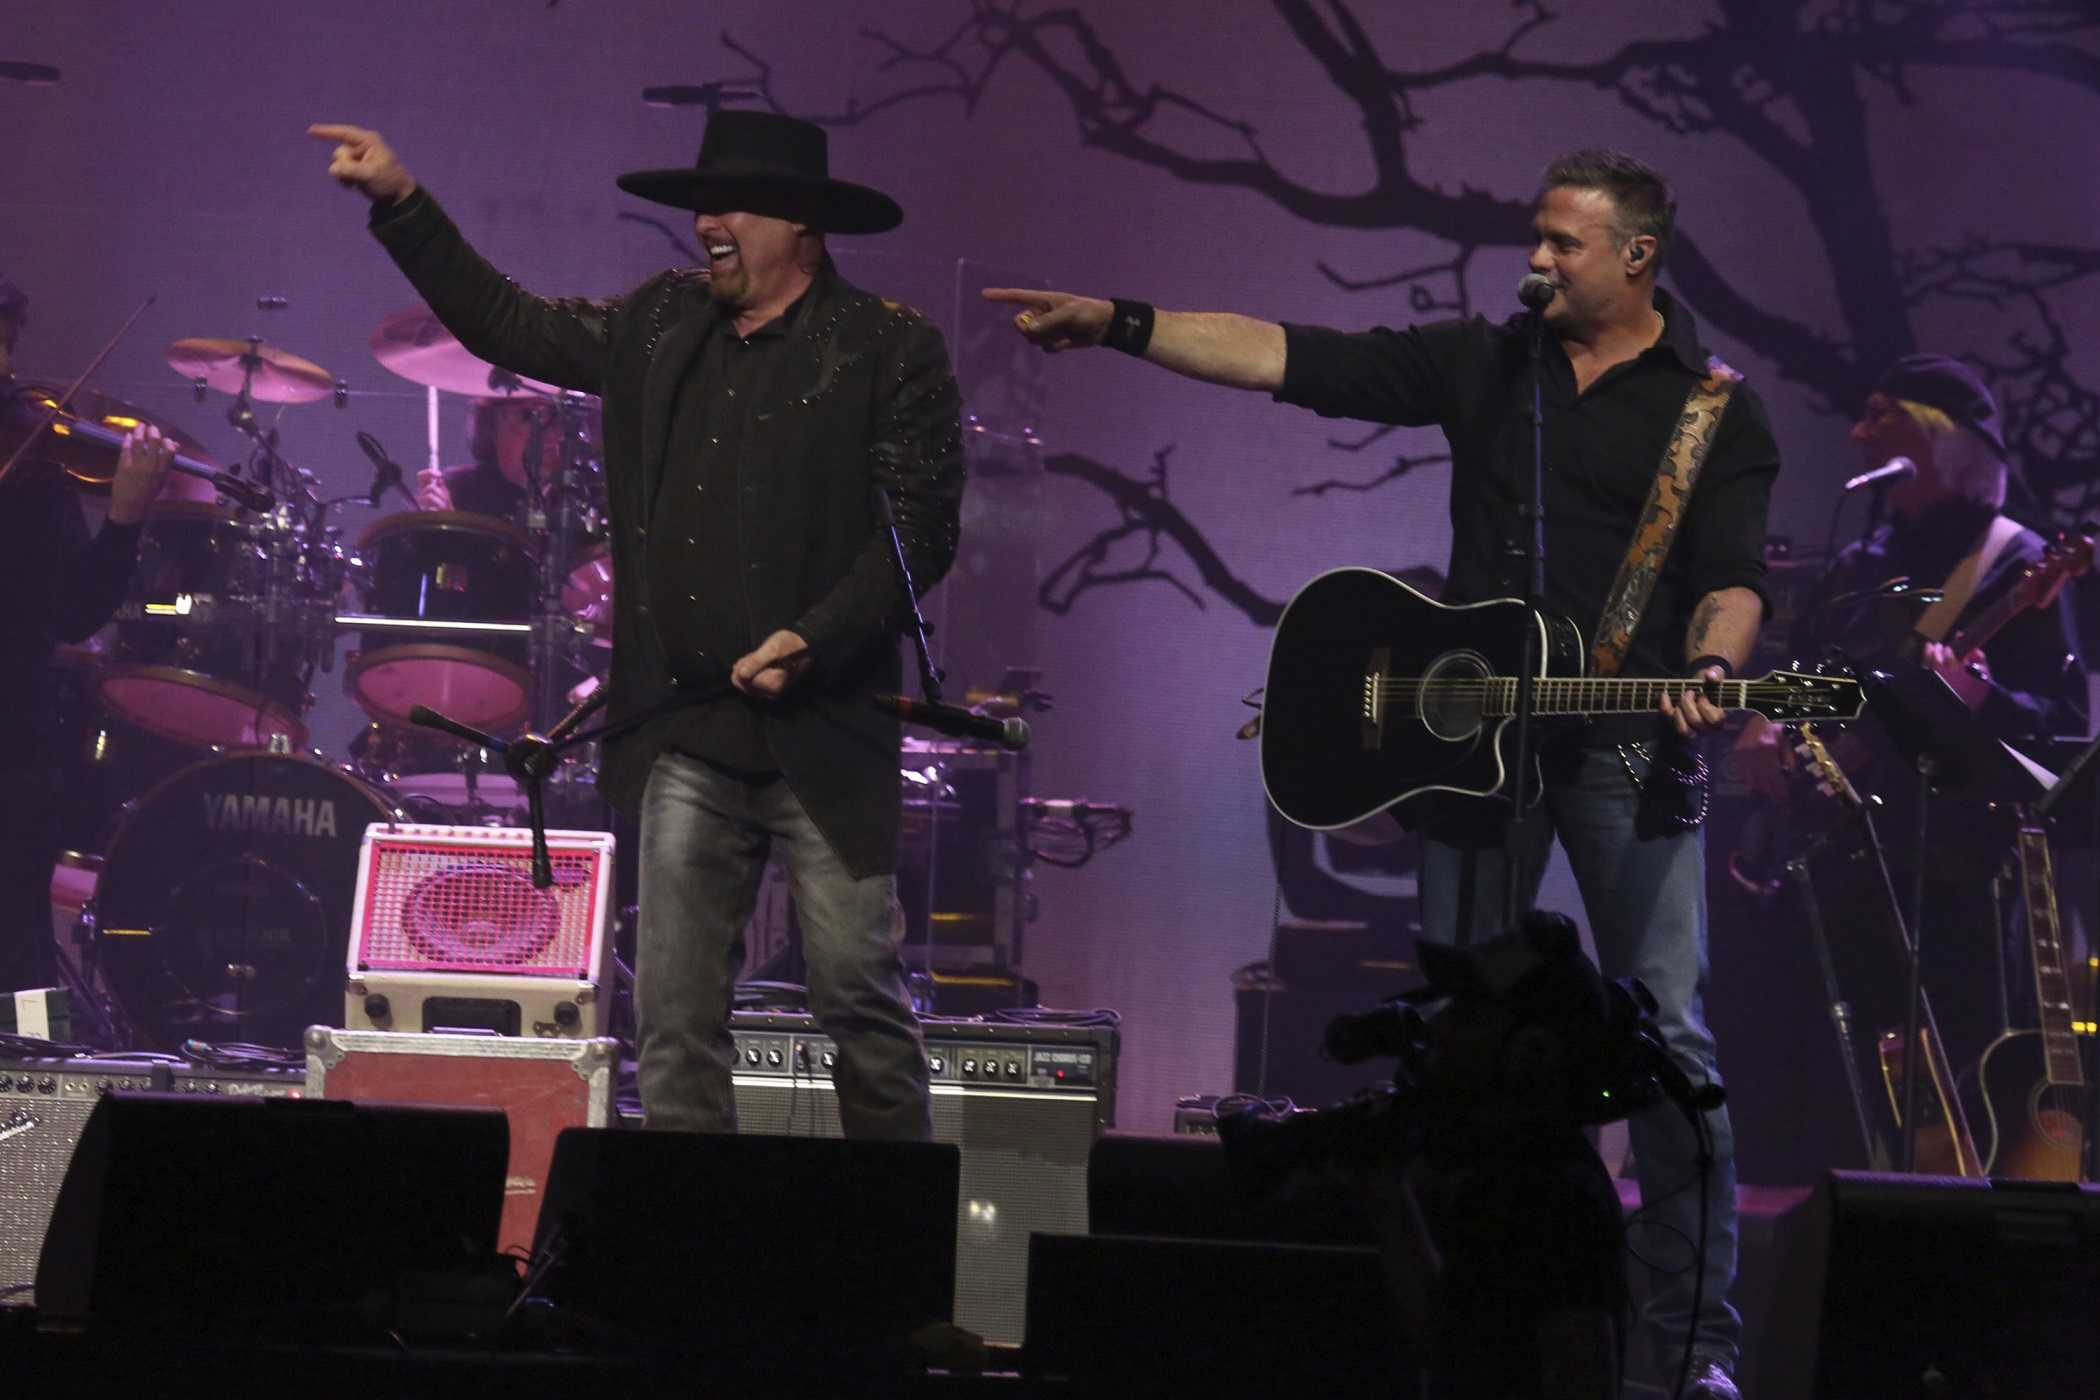 Troy Gentry, of country music group Montgomery Gentry, killed in helicopter crash